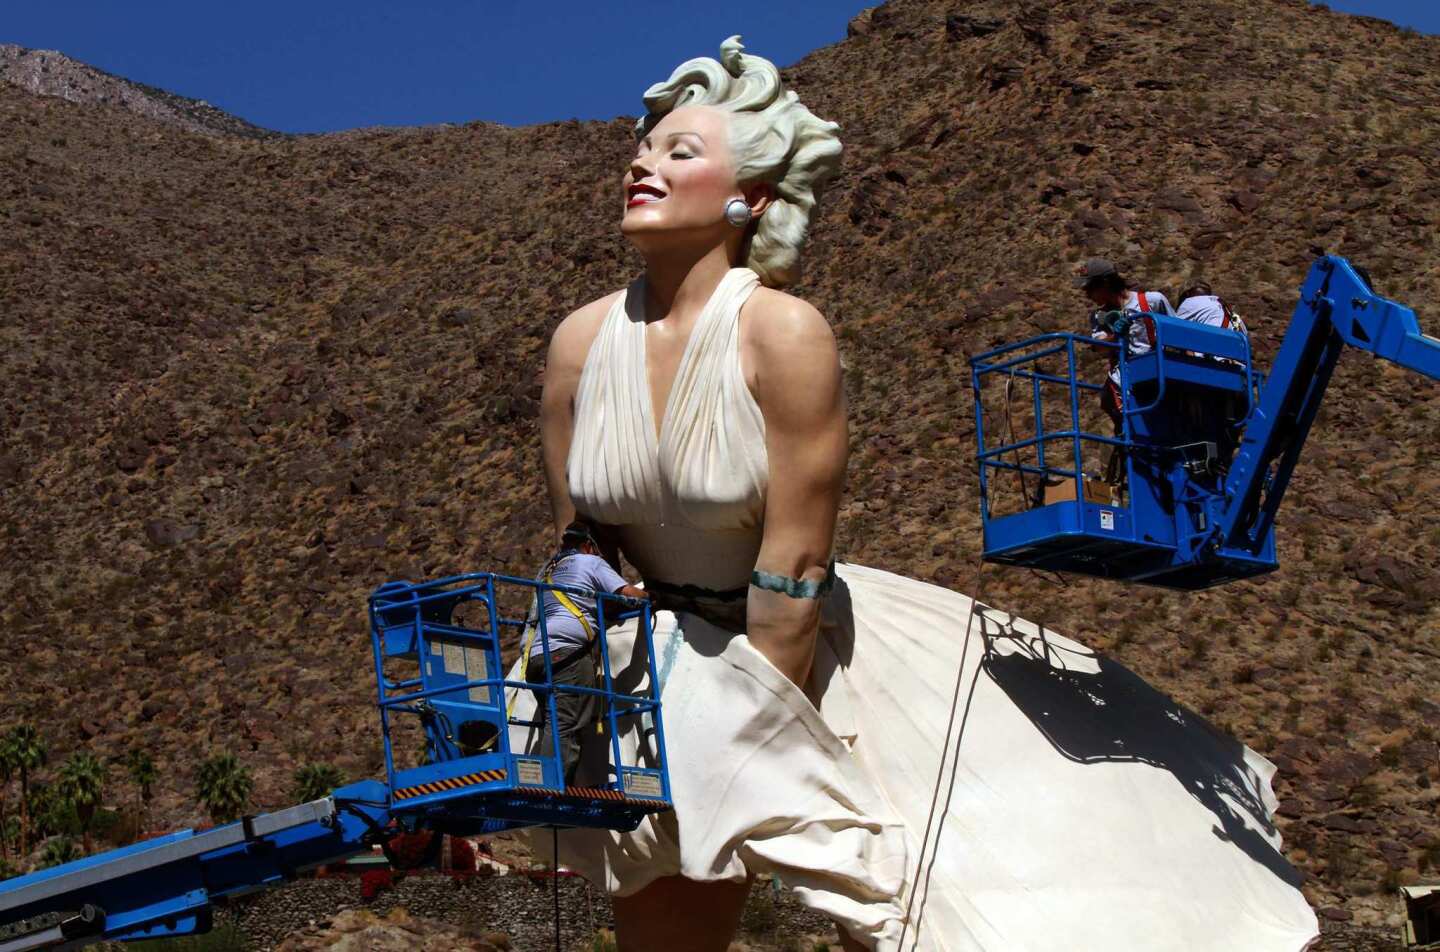 A 26-foot-tall statue of Marilyn Monroe stands in downtown Palm Springs at the corner of Tahquitz Canyon Way and Palm Canyon Drive.